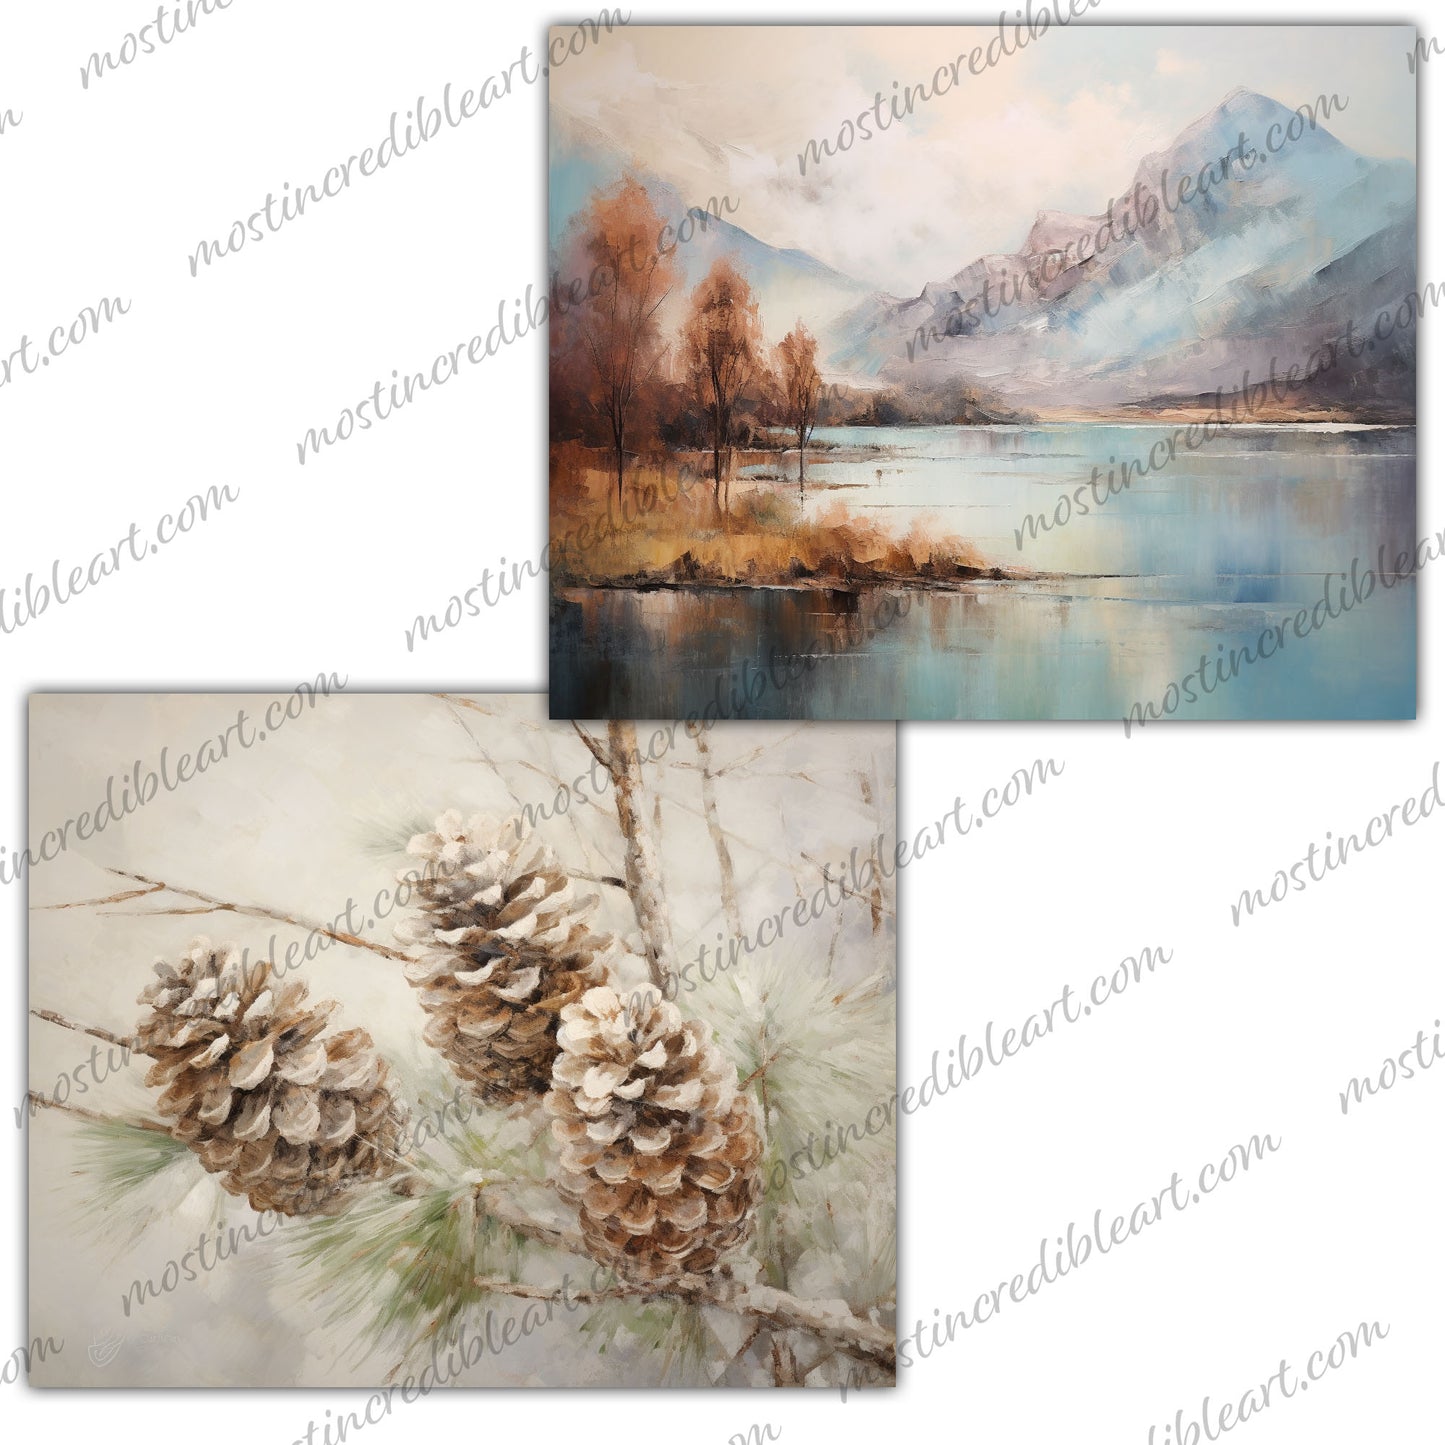 Printable Art Set for Christmas | Rustic Winter Snowy Gallery Wall Decor